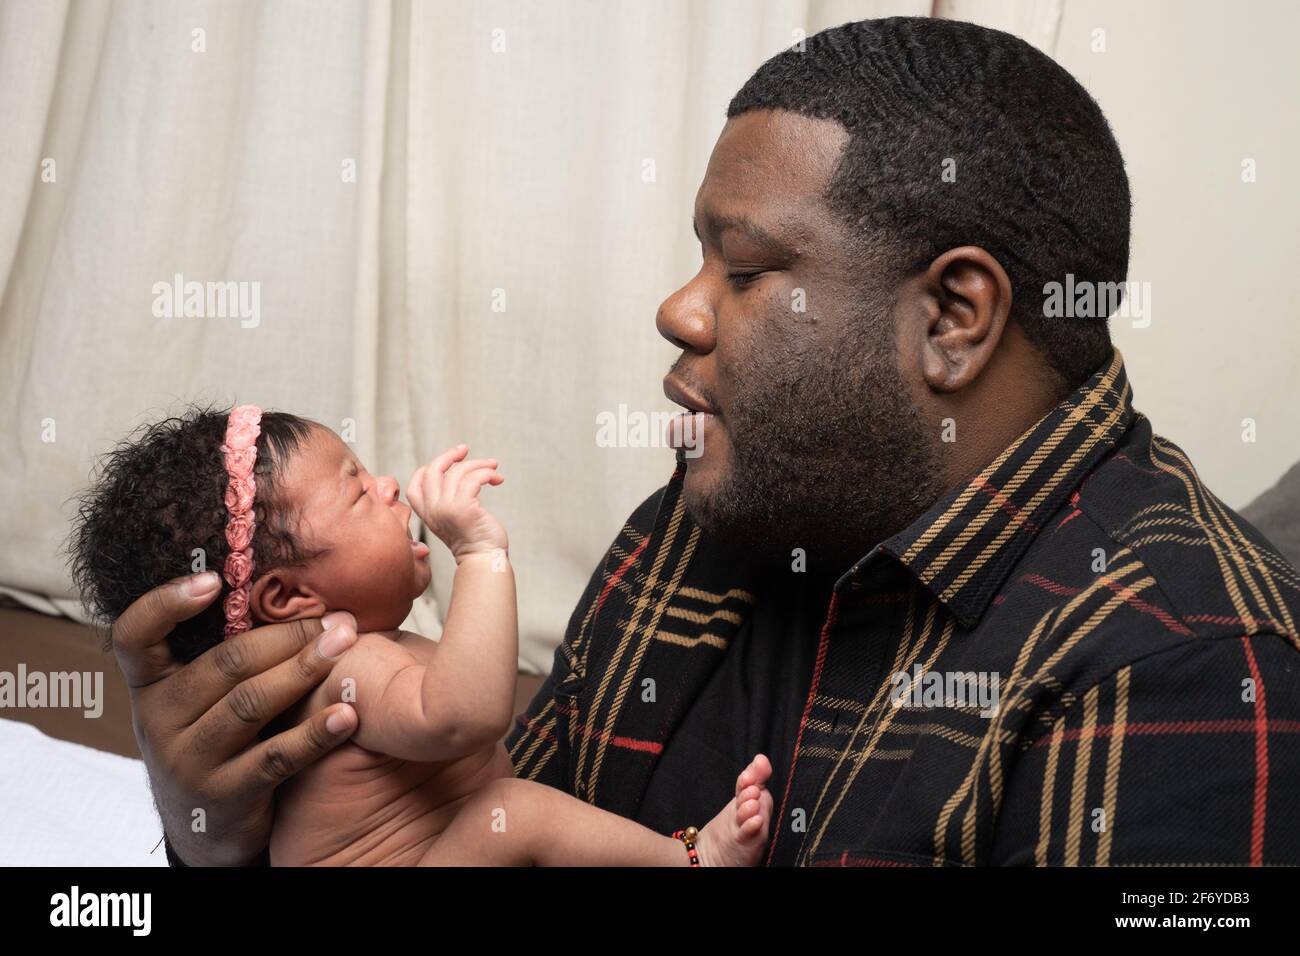 Newborn baby girl 3 weeks old, held by father, crying, talked to Stock Photo